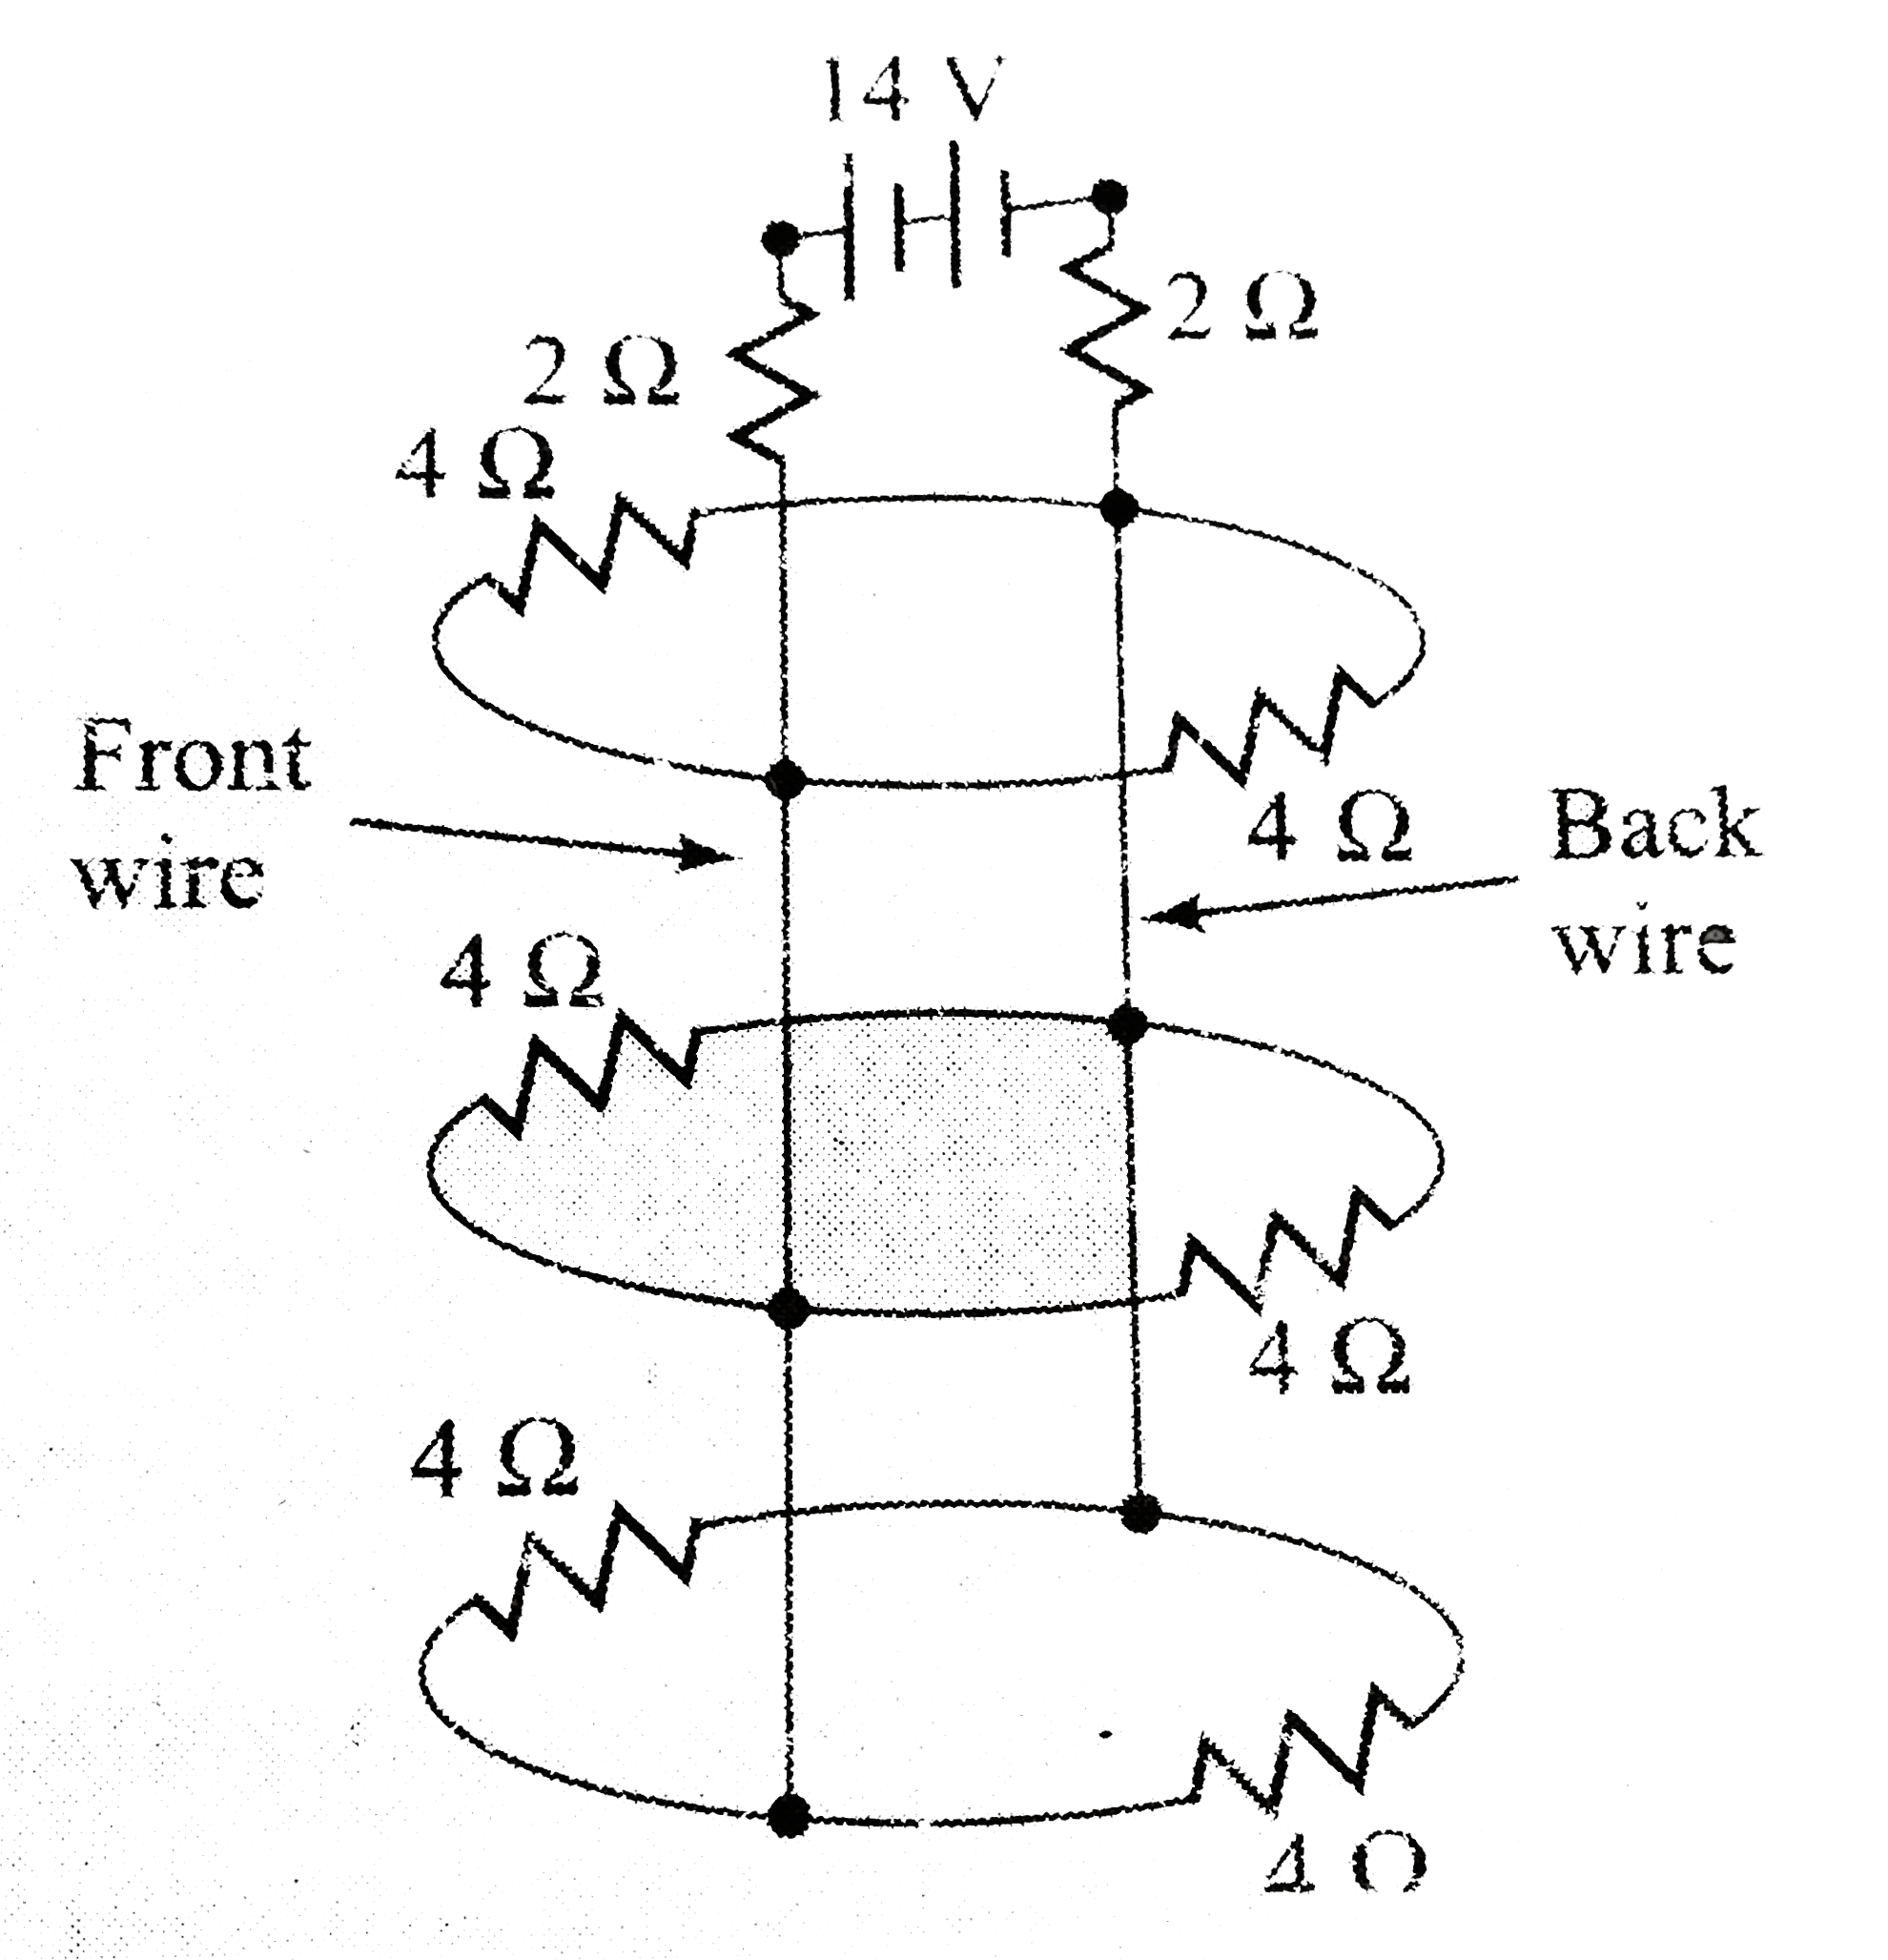 Determine the currents I1, I2, and I3 for the network shown below      a. I1 = ………., b. I2 = …………. , c. I3 = …………….